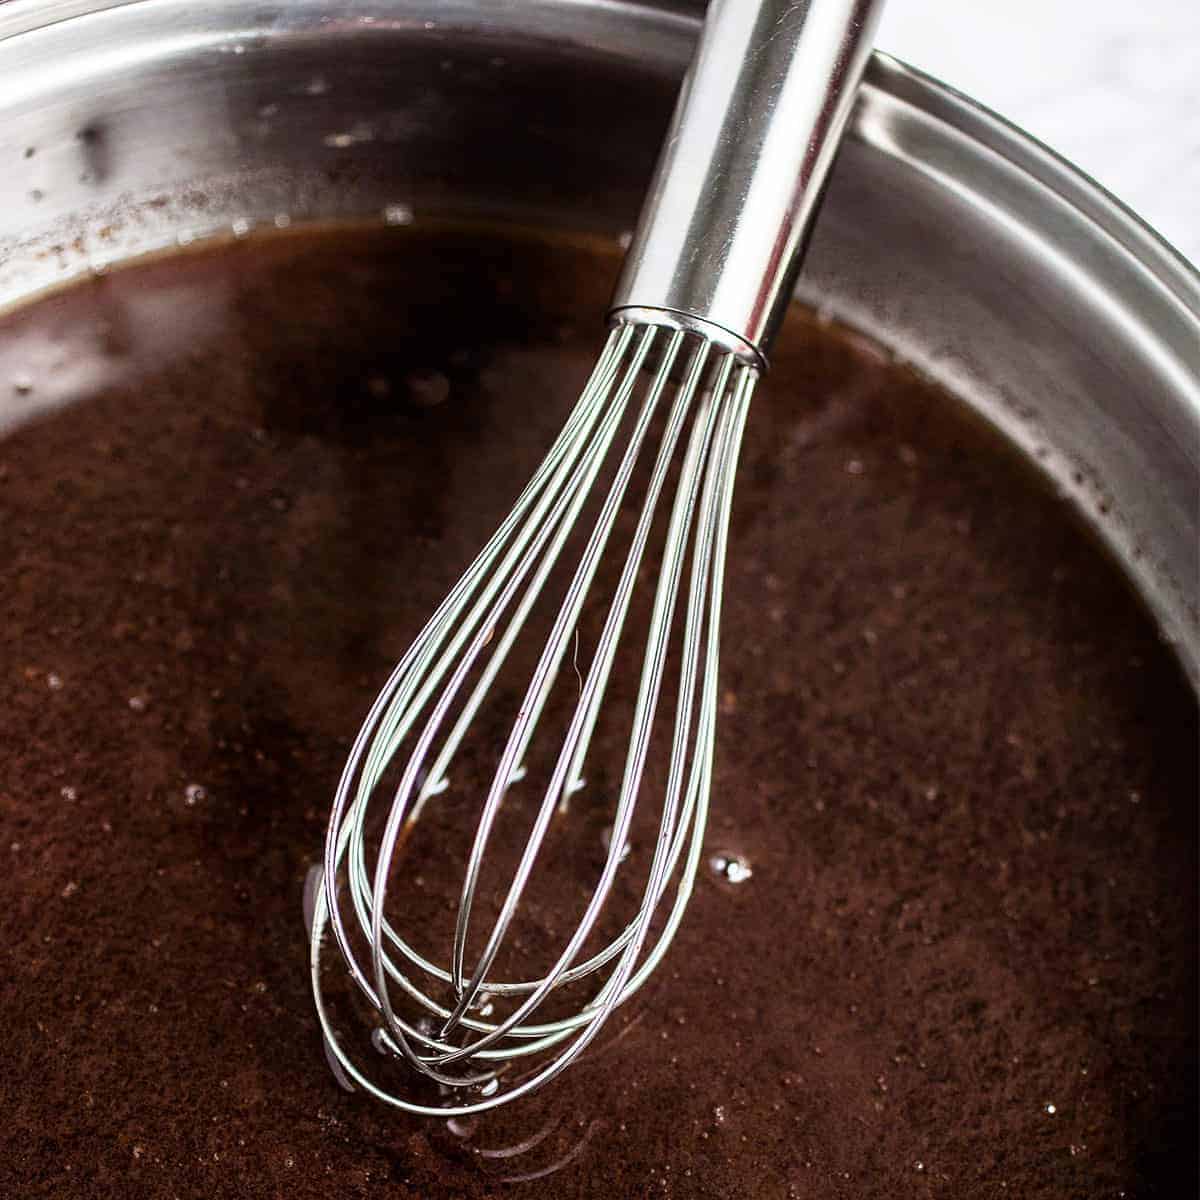 au jus sauce for prime rib in a metal bowl with a whisk